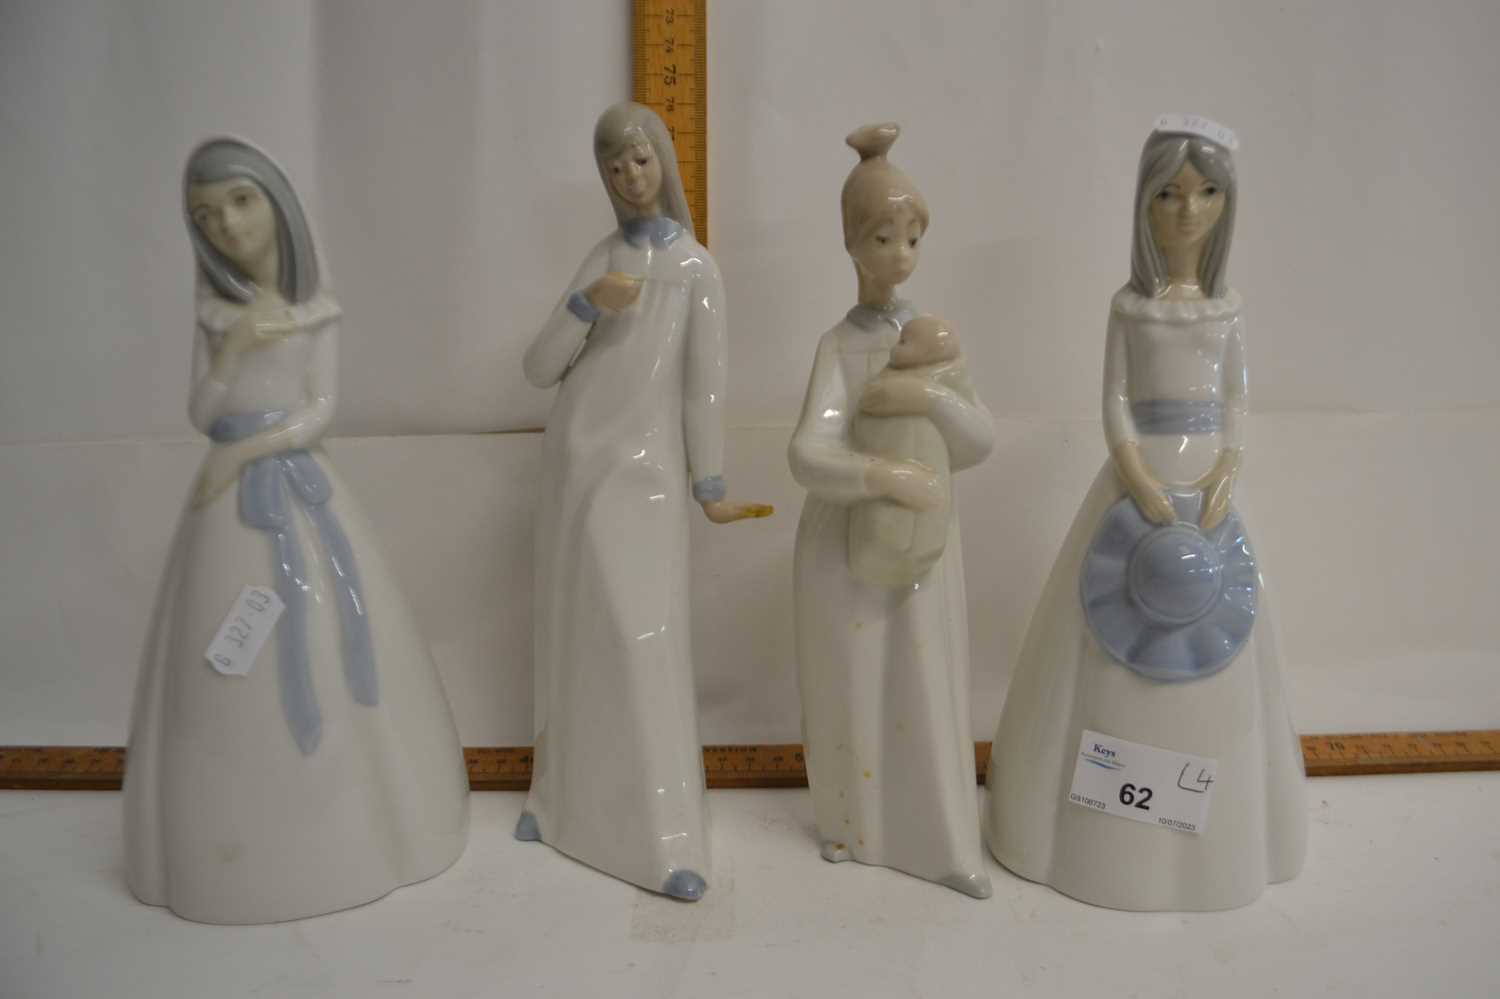 Four various Spanish figurines in the Lladro style